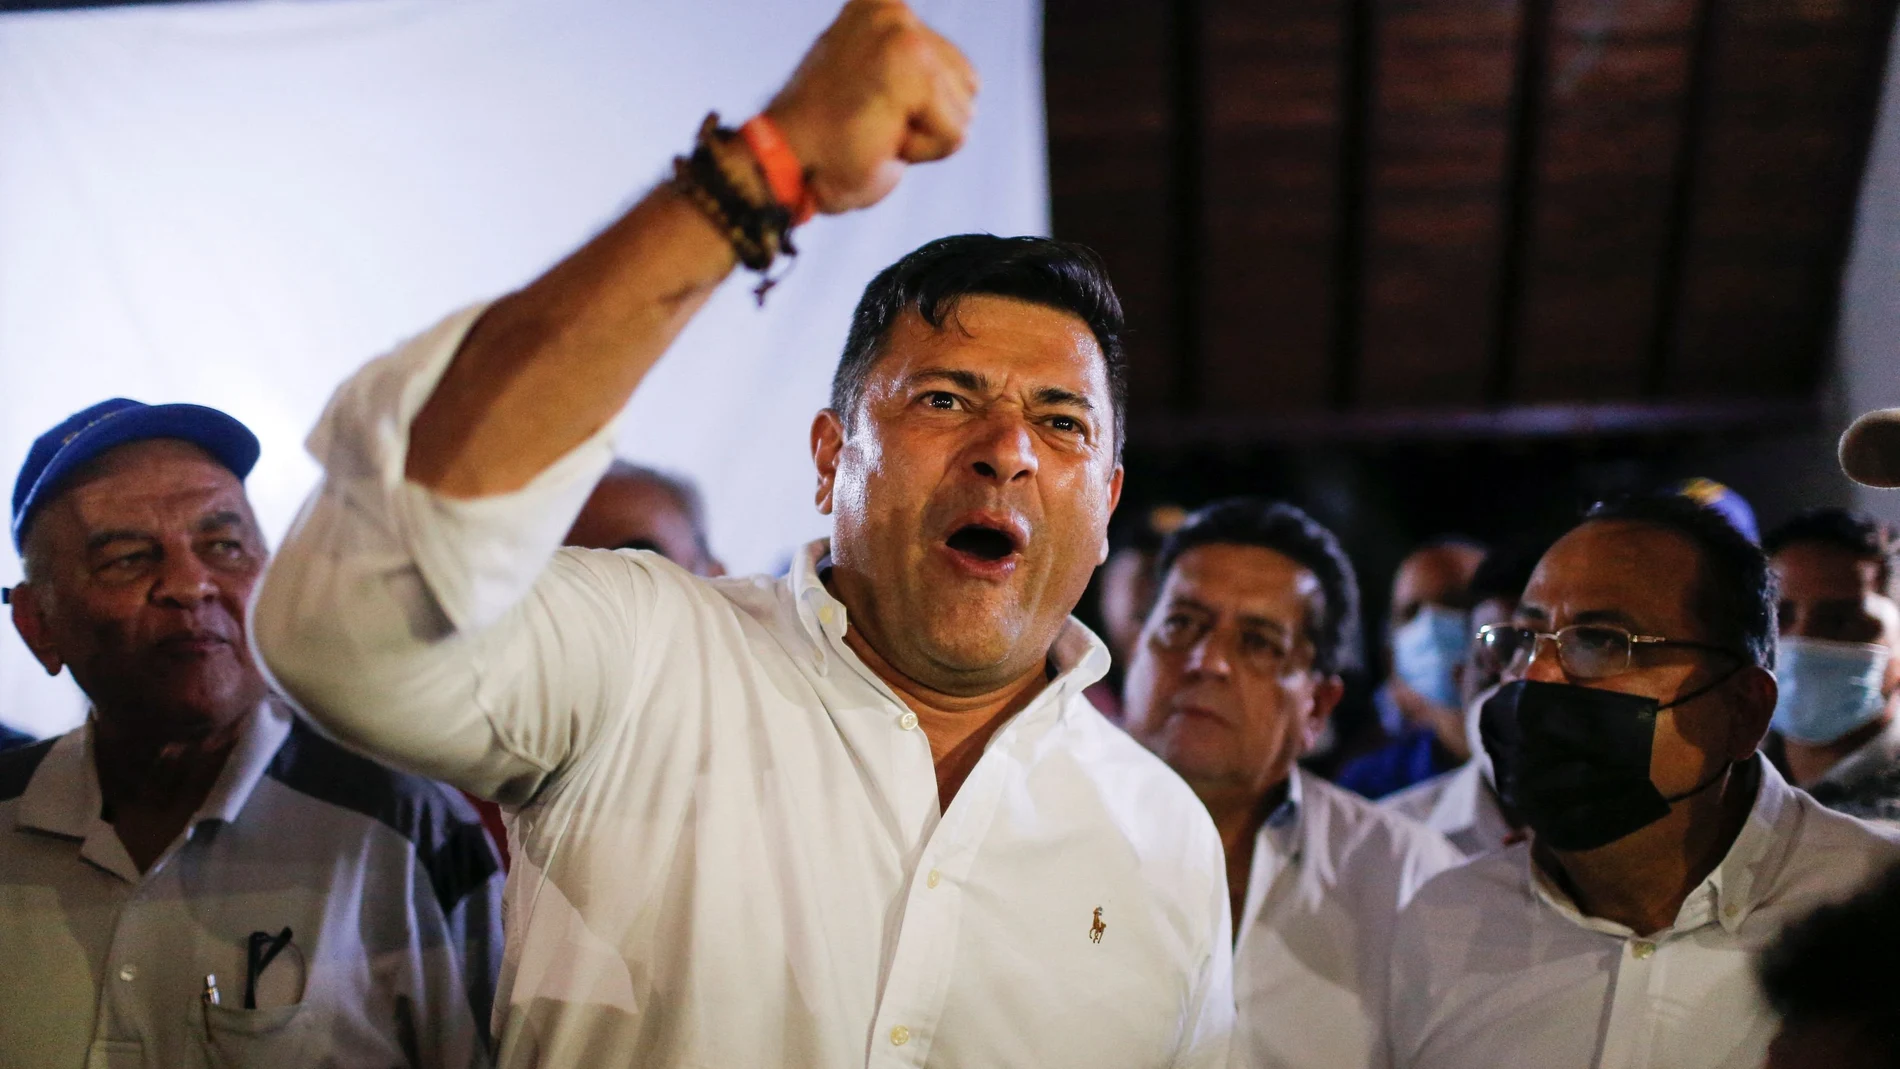 Freddy Superlano, leader of "Voluntad Popular" opposition party reacts on the evening after the state of Barinas held a re-run of the gubernatorial election, in Barinas, Venezuela January 9, 2022. REUTERS/Leonardo Fernandez Viloria